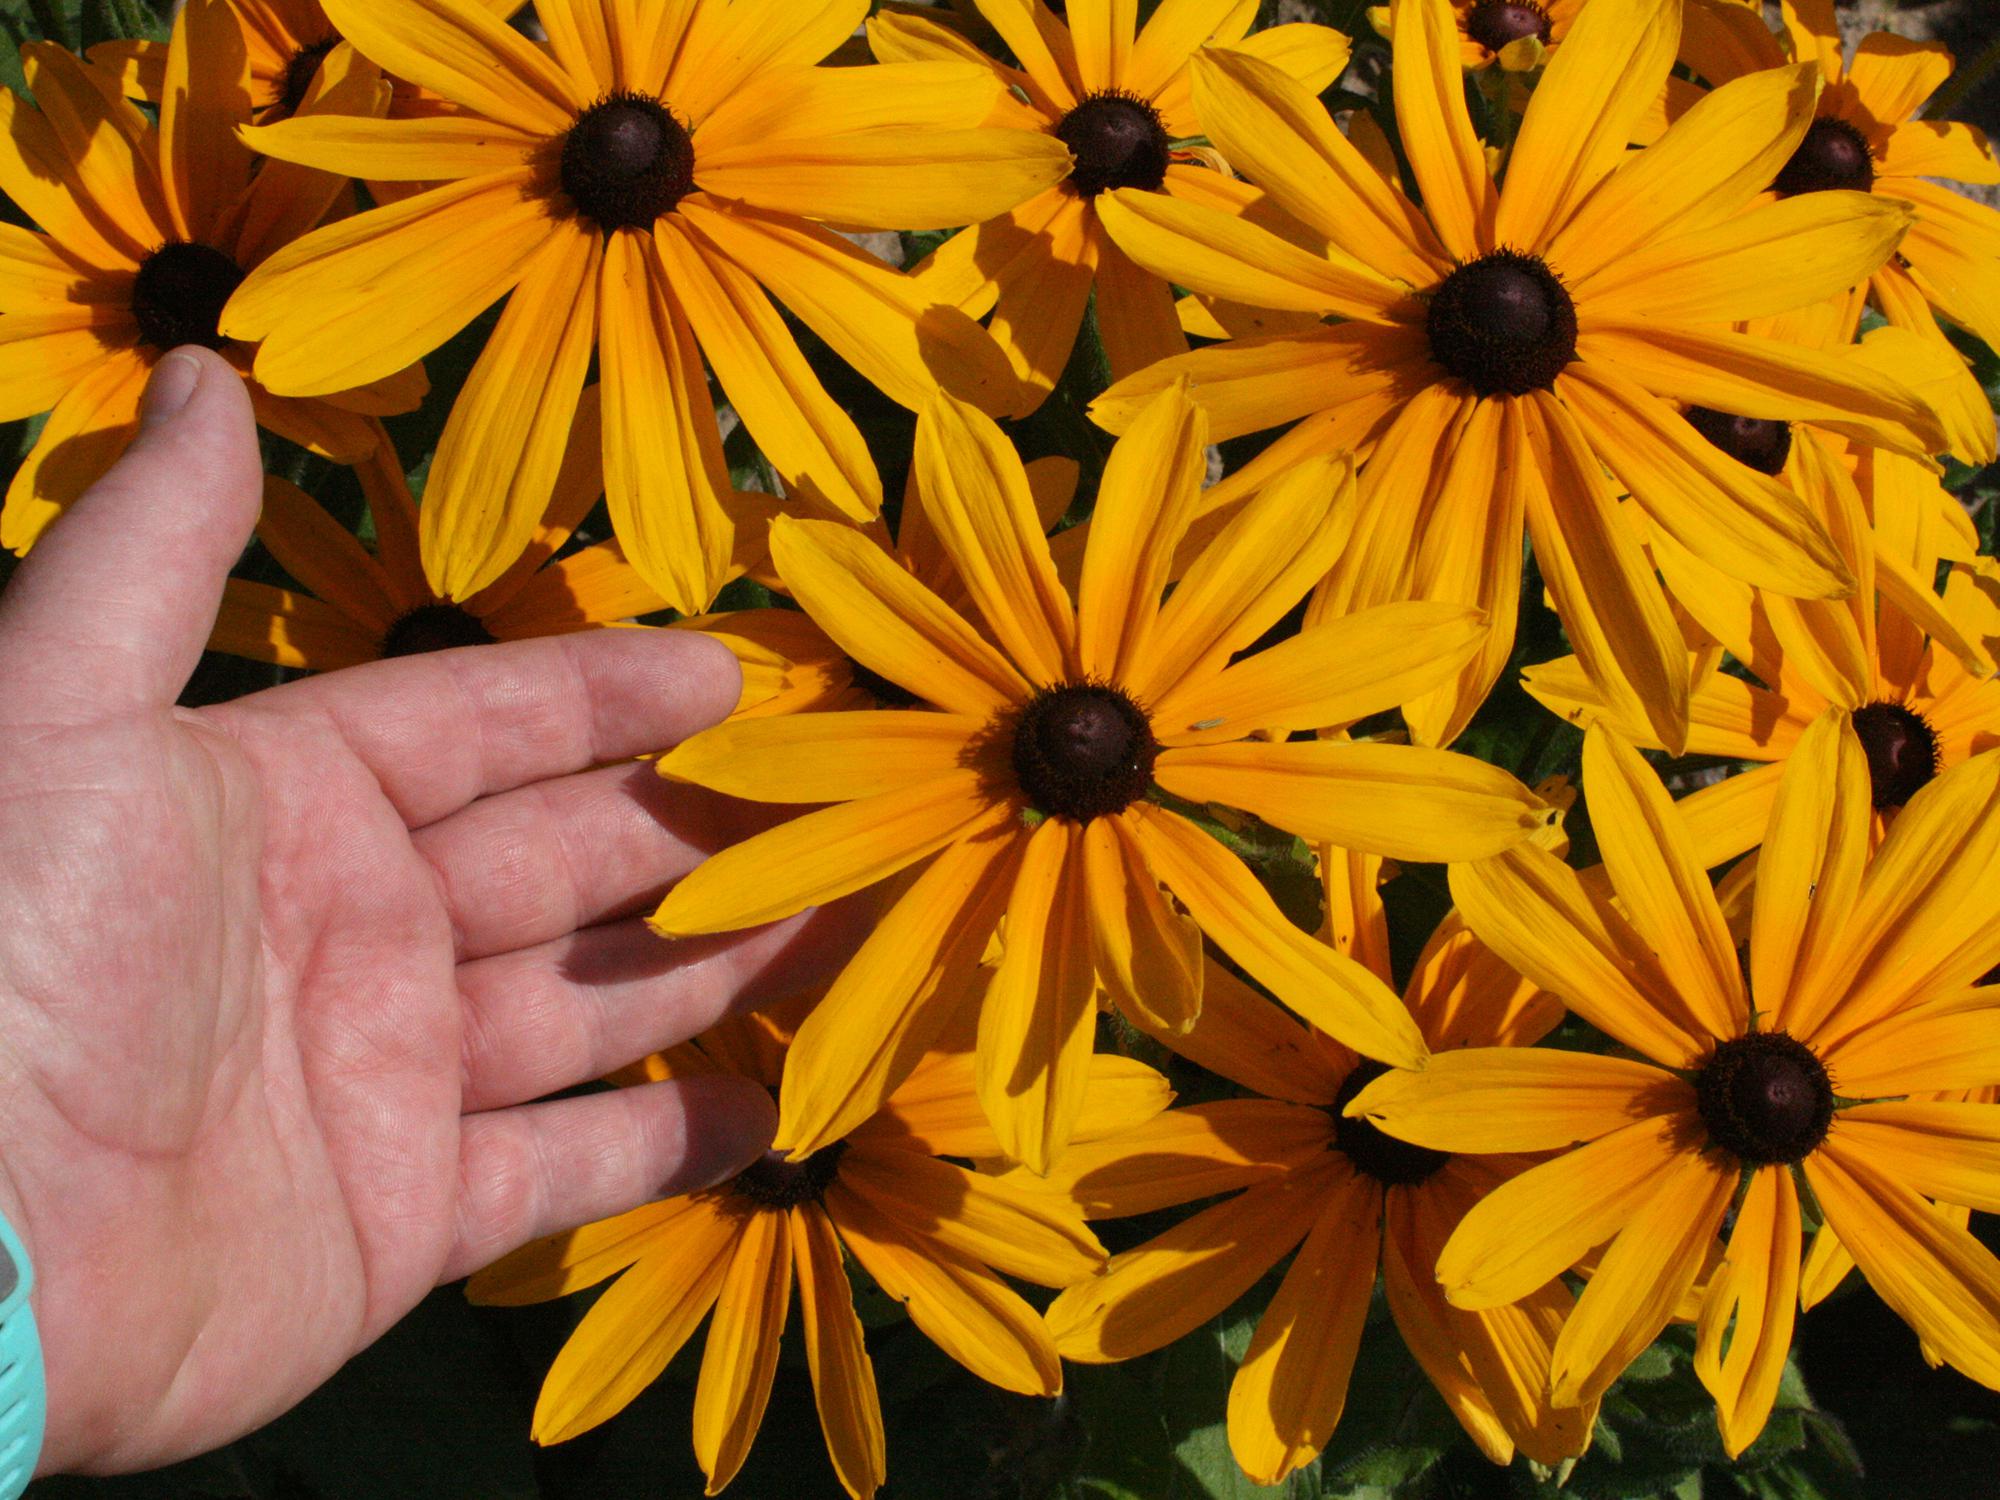 A man’s hand reaches into a bouquet of bright yellow flowers.